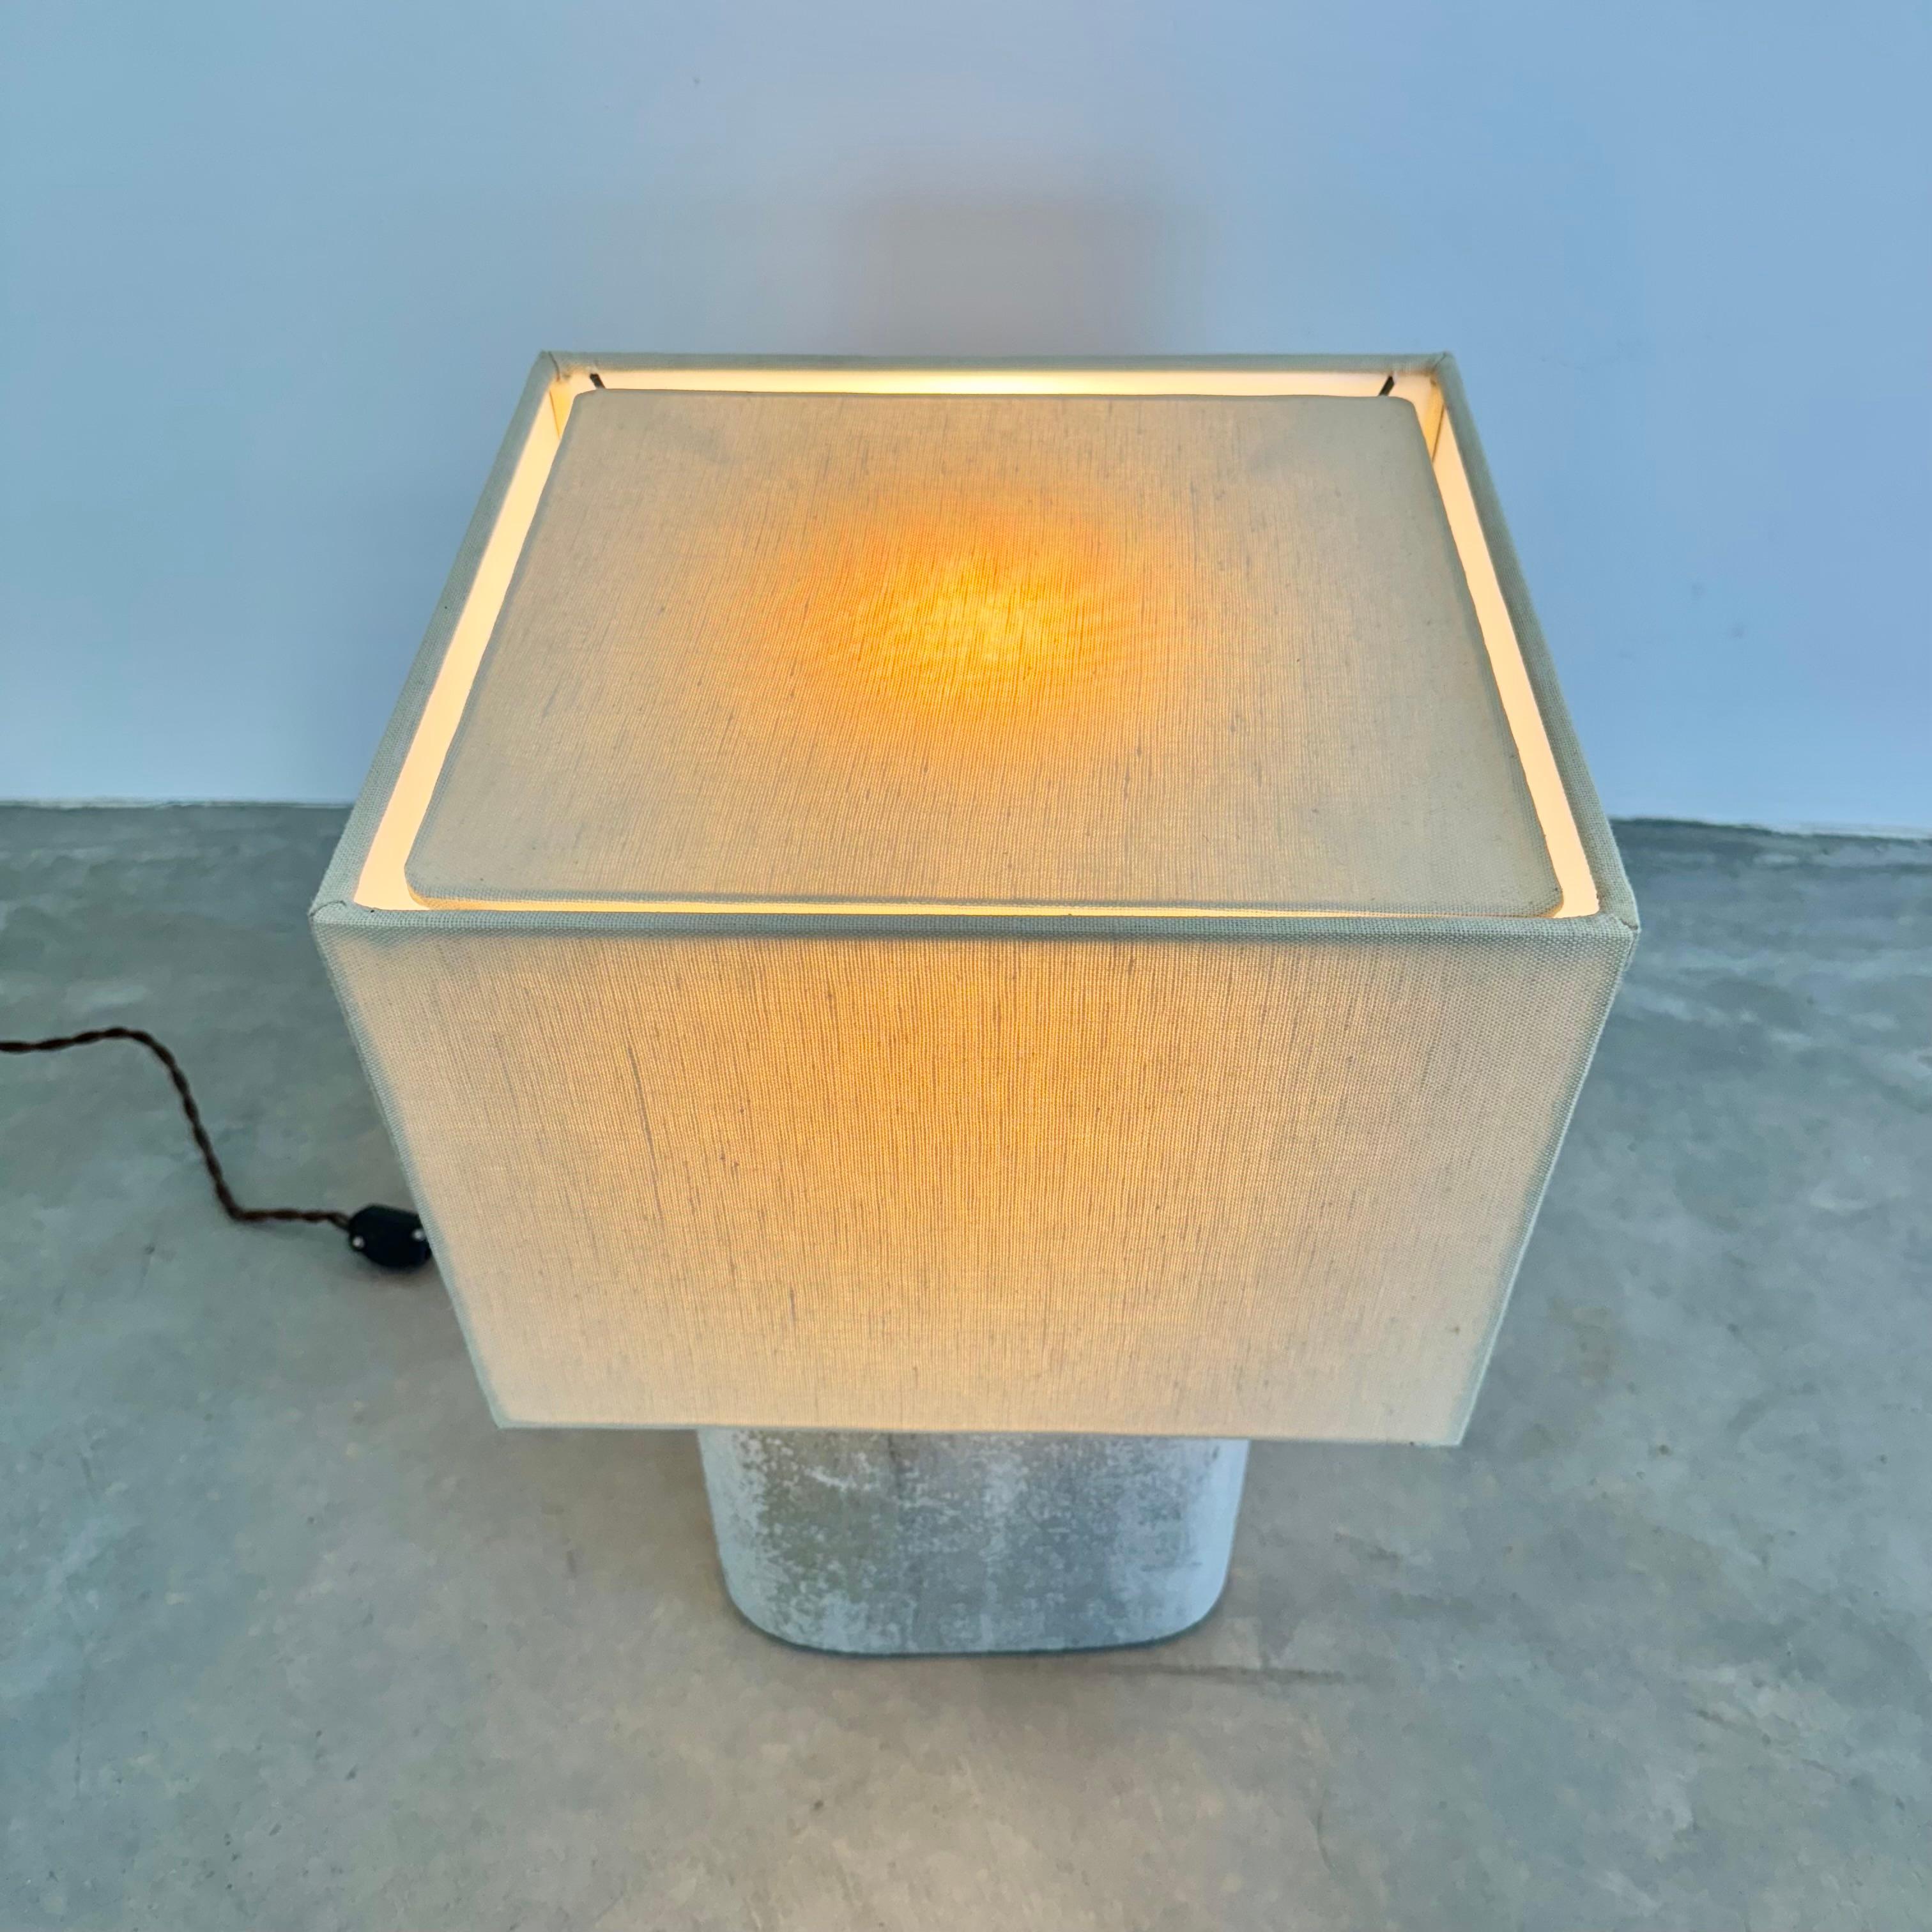 Stunning concrete Willy Guhl lamp by Eternit with teak top cover. Concrete made in Swizterland. Newly fitted as a lamp, re-wired with a new custom linen shade and light diffusor on top. Stunning simplicity and beautiful texture make these lamps